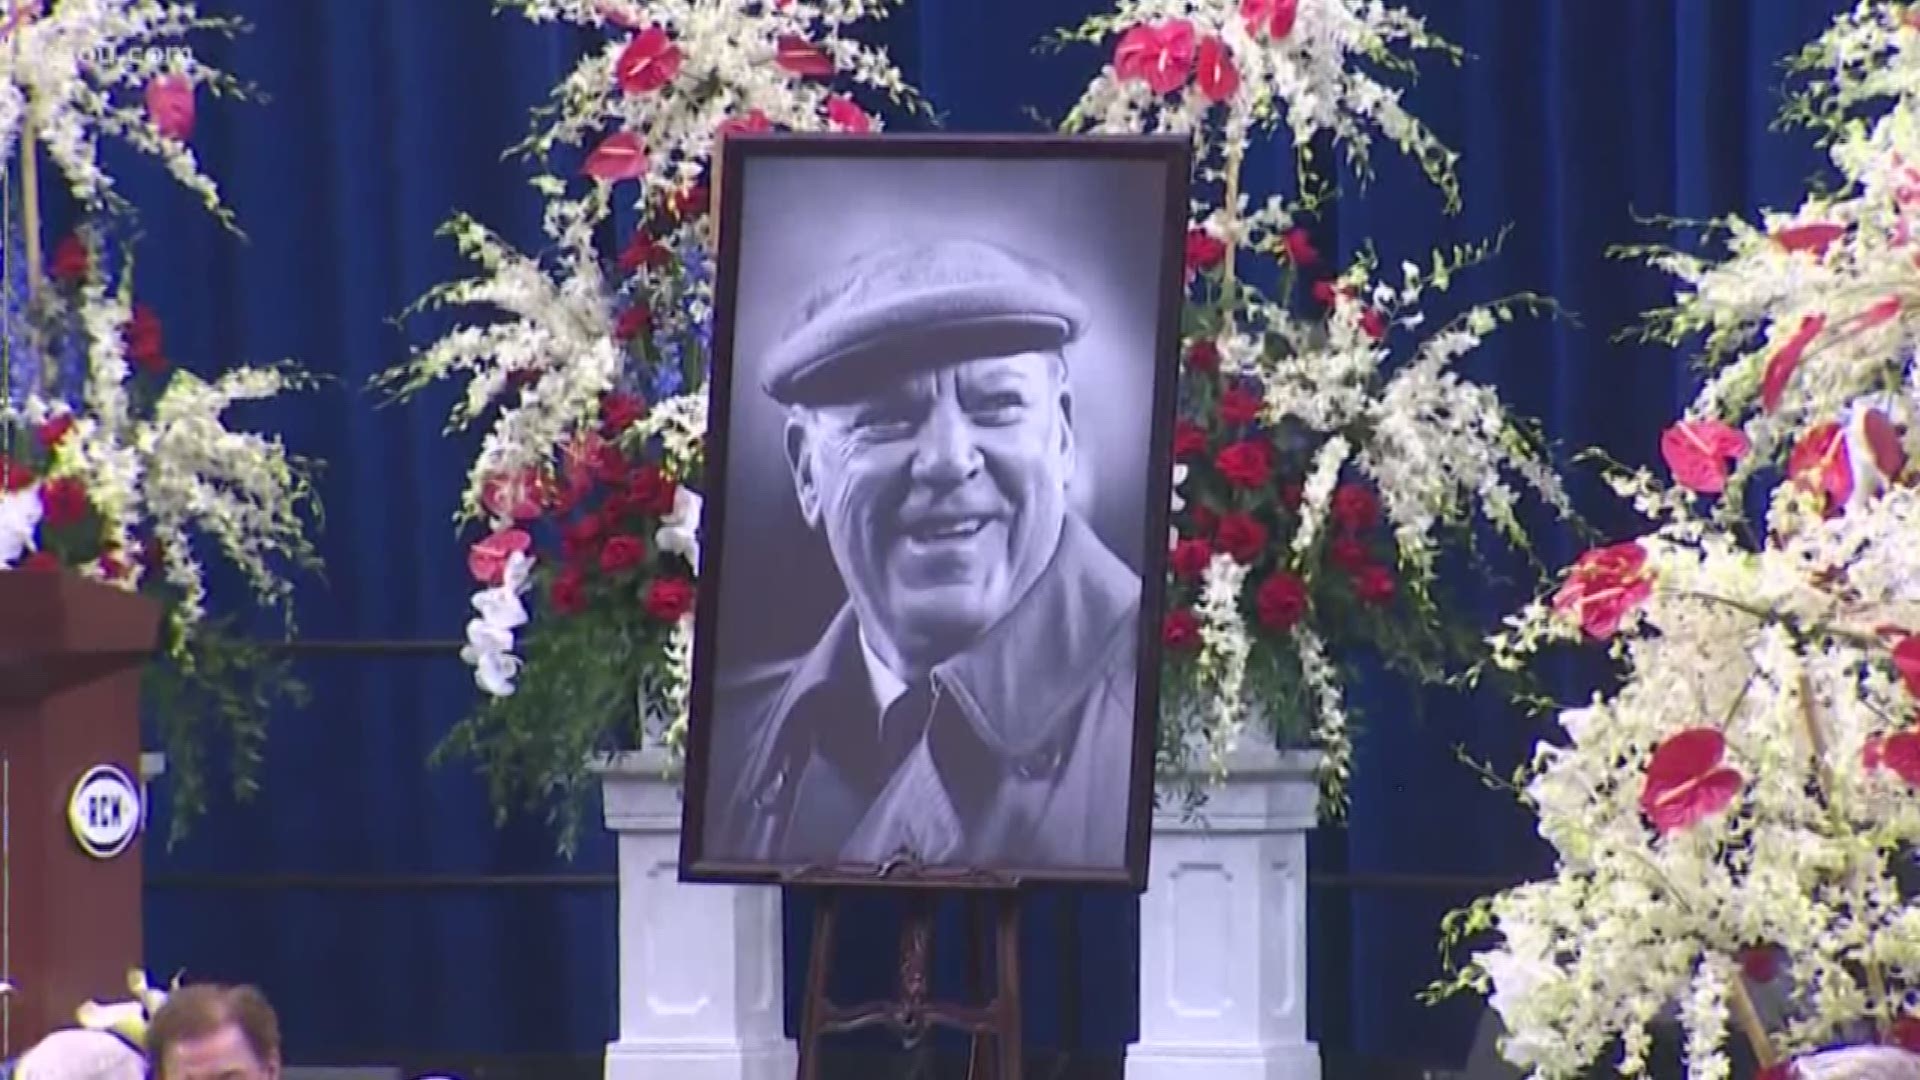 The Houston Texans on Friday held a "Celebration of Life" event for owner Bob McNair at NRG Stadium. McNair died on Nov. 23.